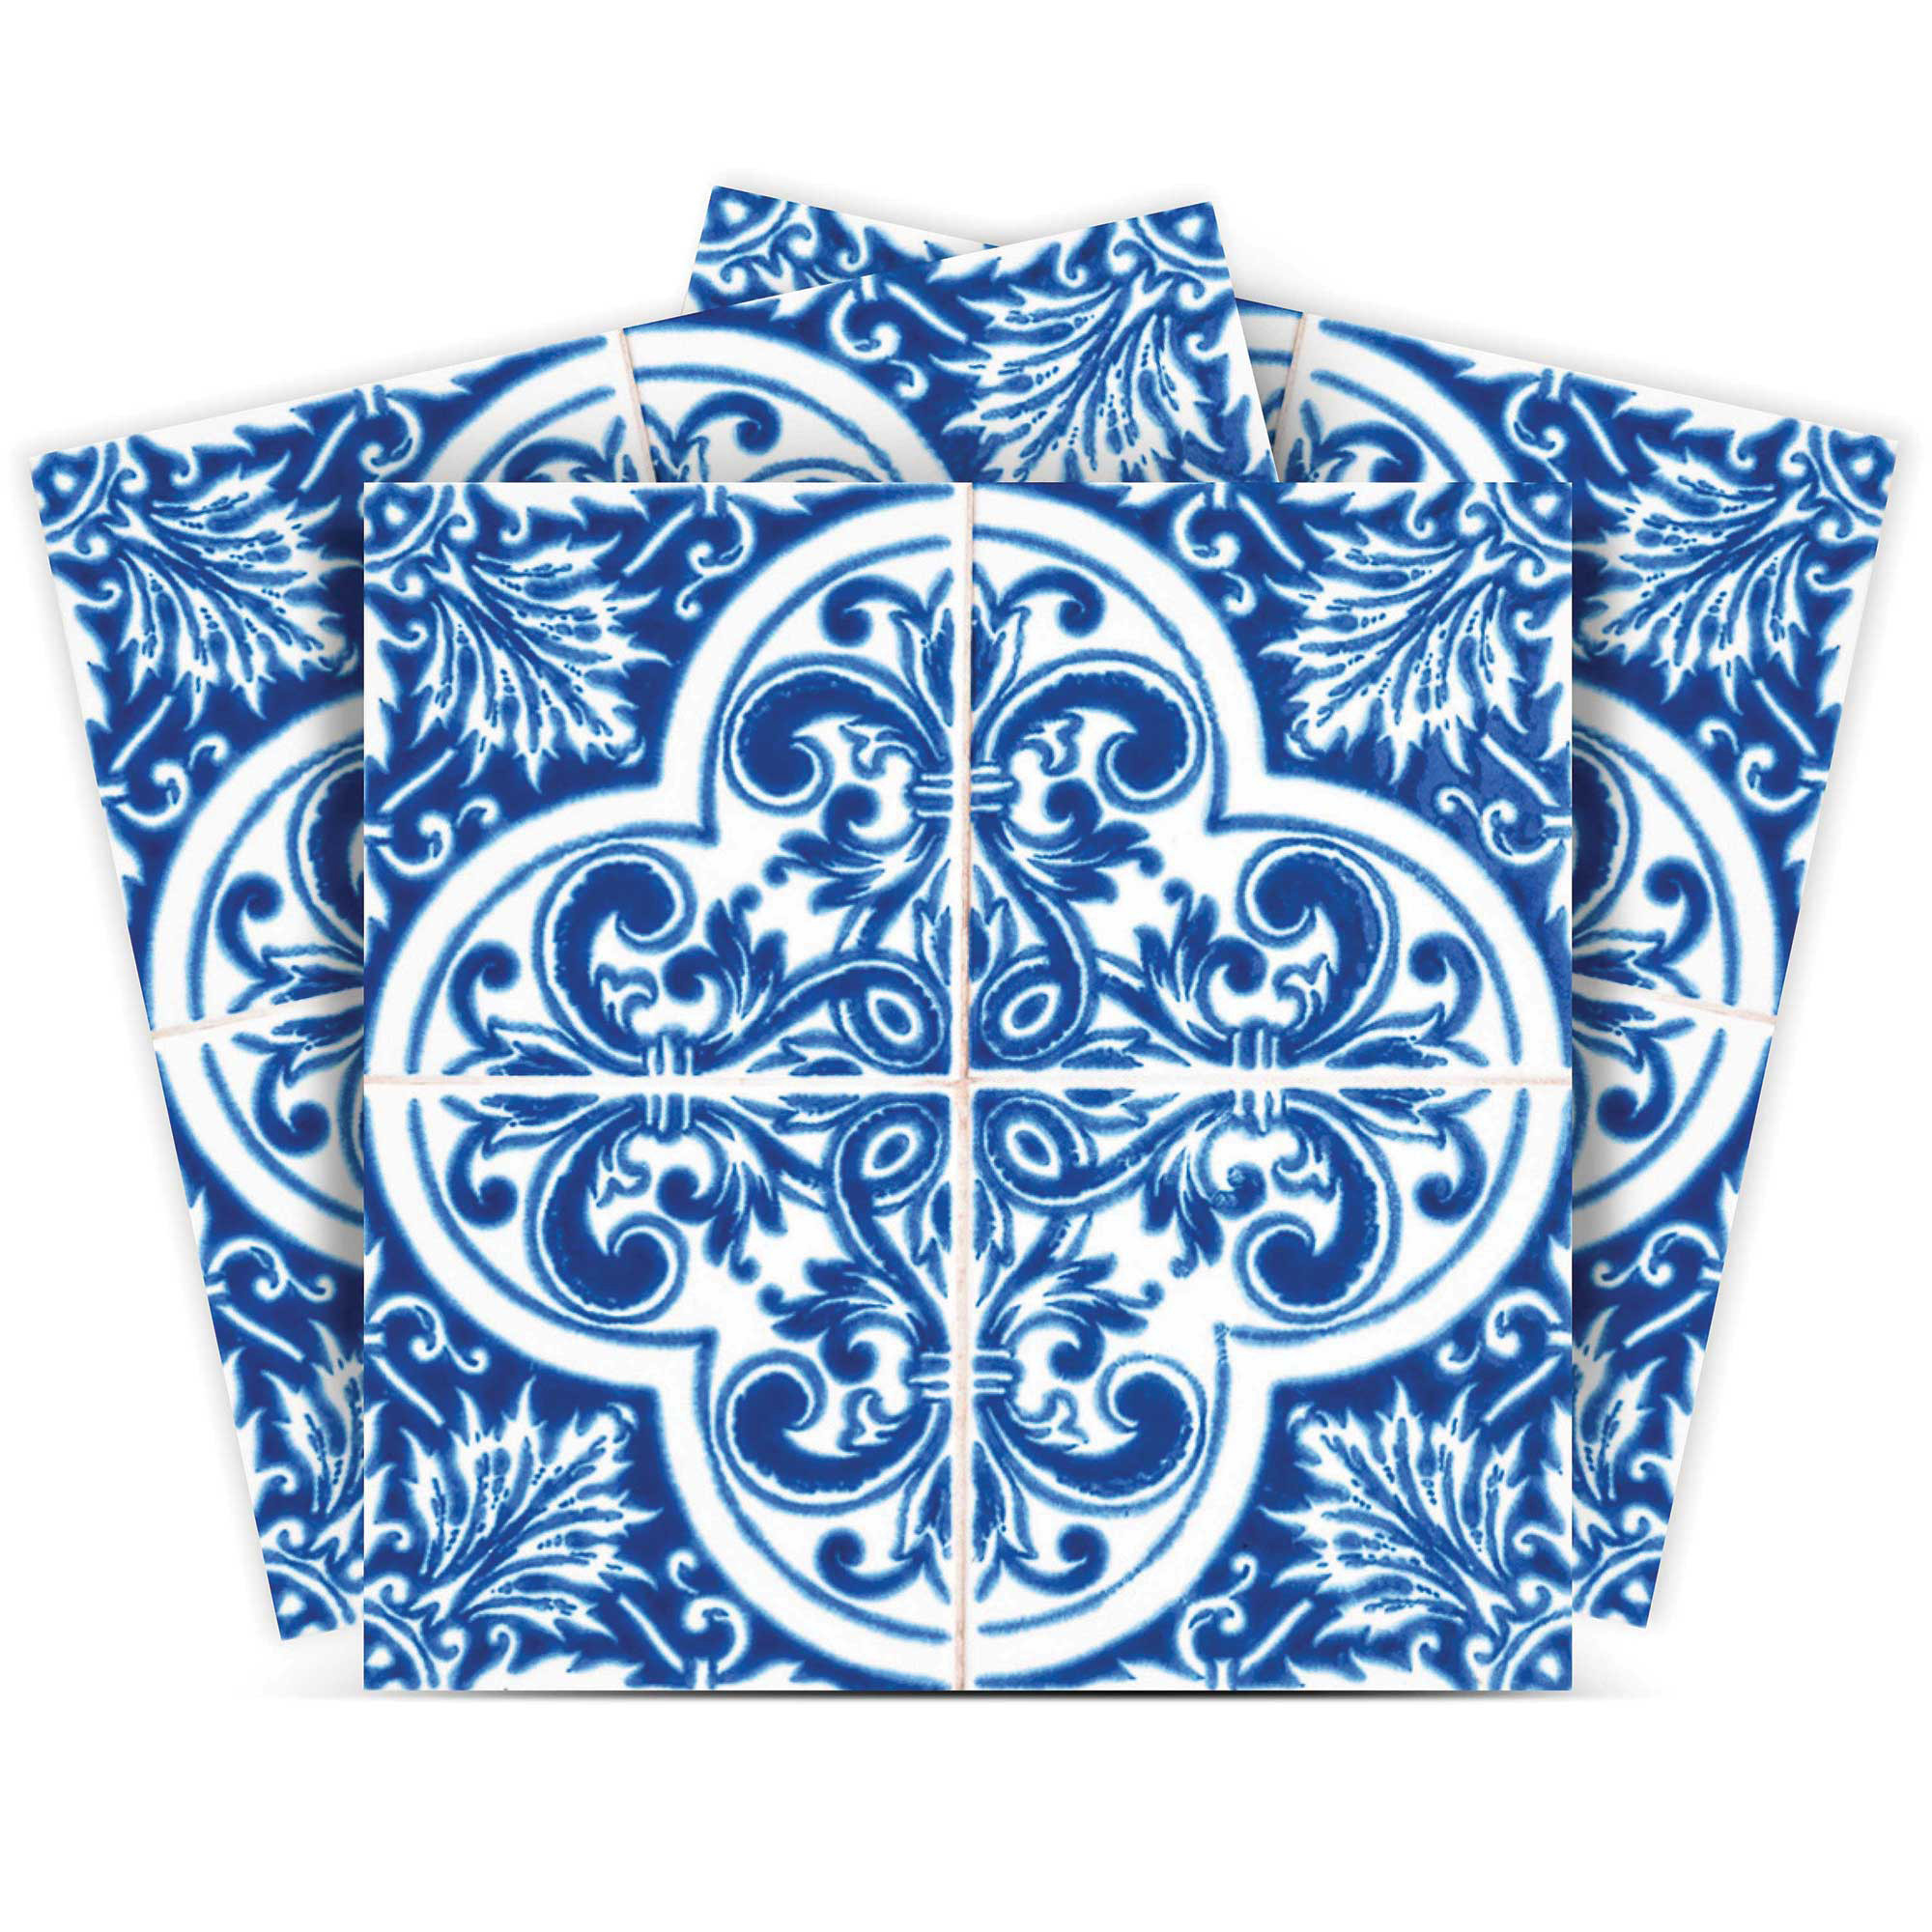 4" X 4" Blue and White Cross Peel And Stick Tiles-400116-1